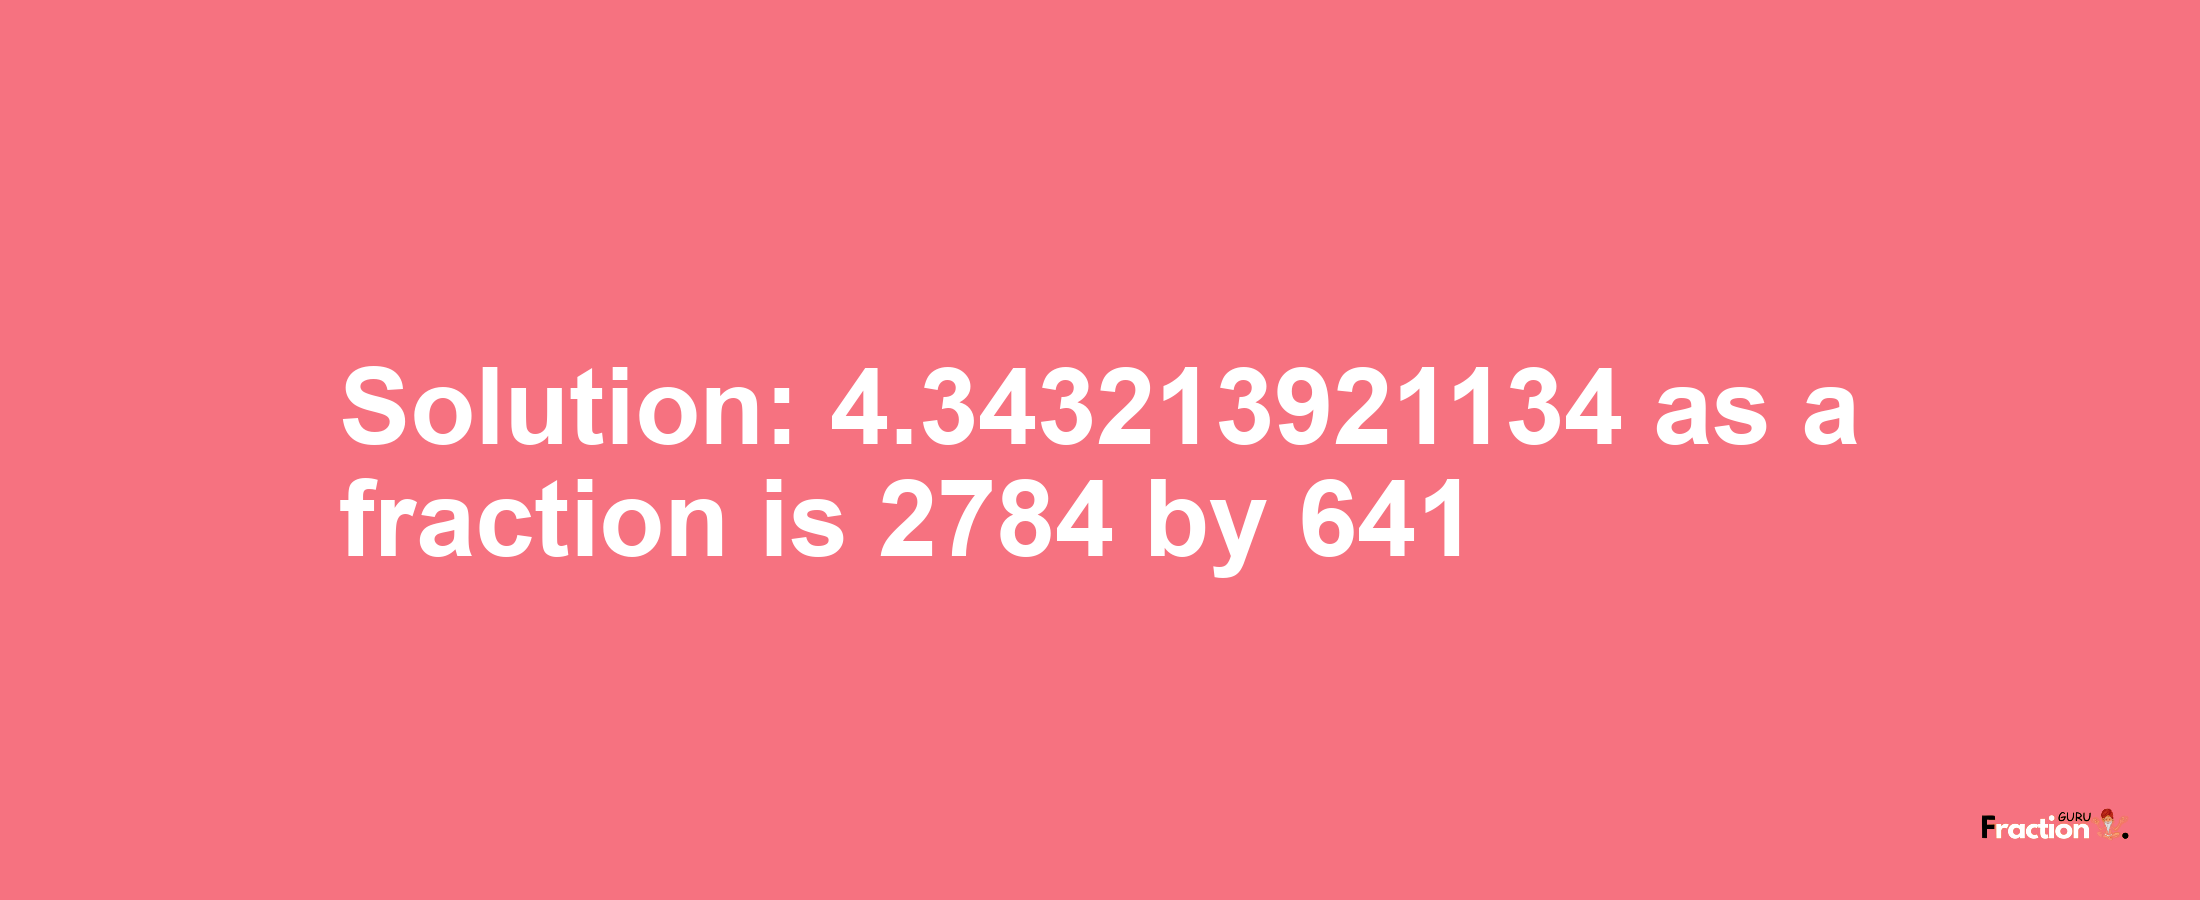 Solution:4.343213921134 as a fraction is 2784/641